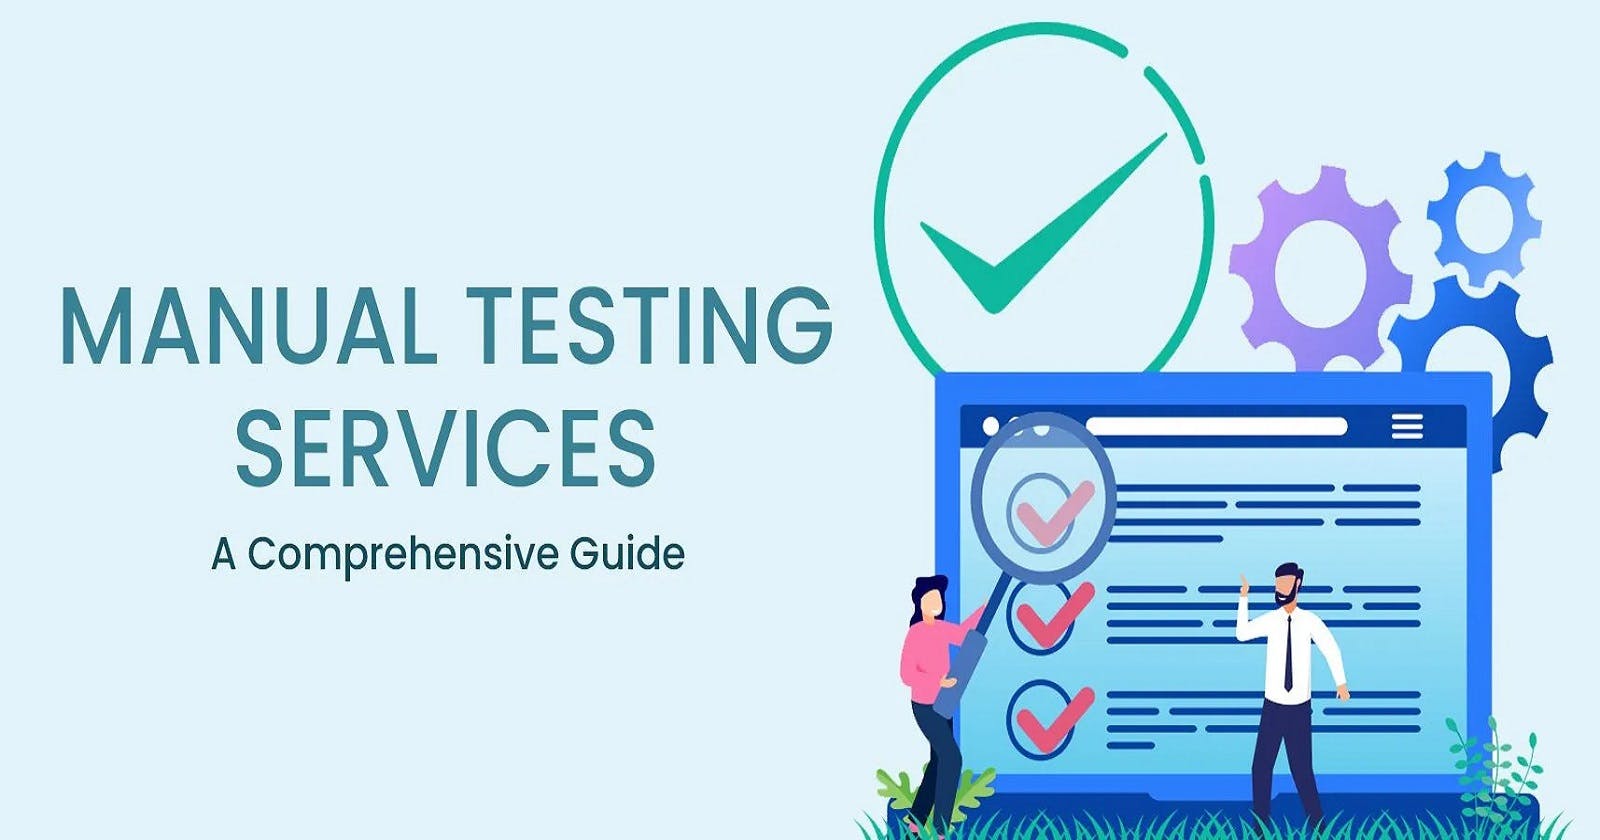 A Comprehensive Guide for Manual Testing Services: Meaning, Process, Relevancy & Tools